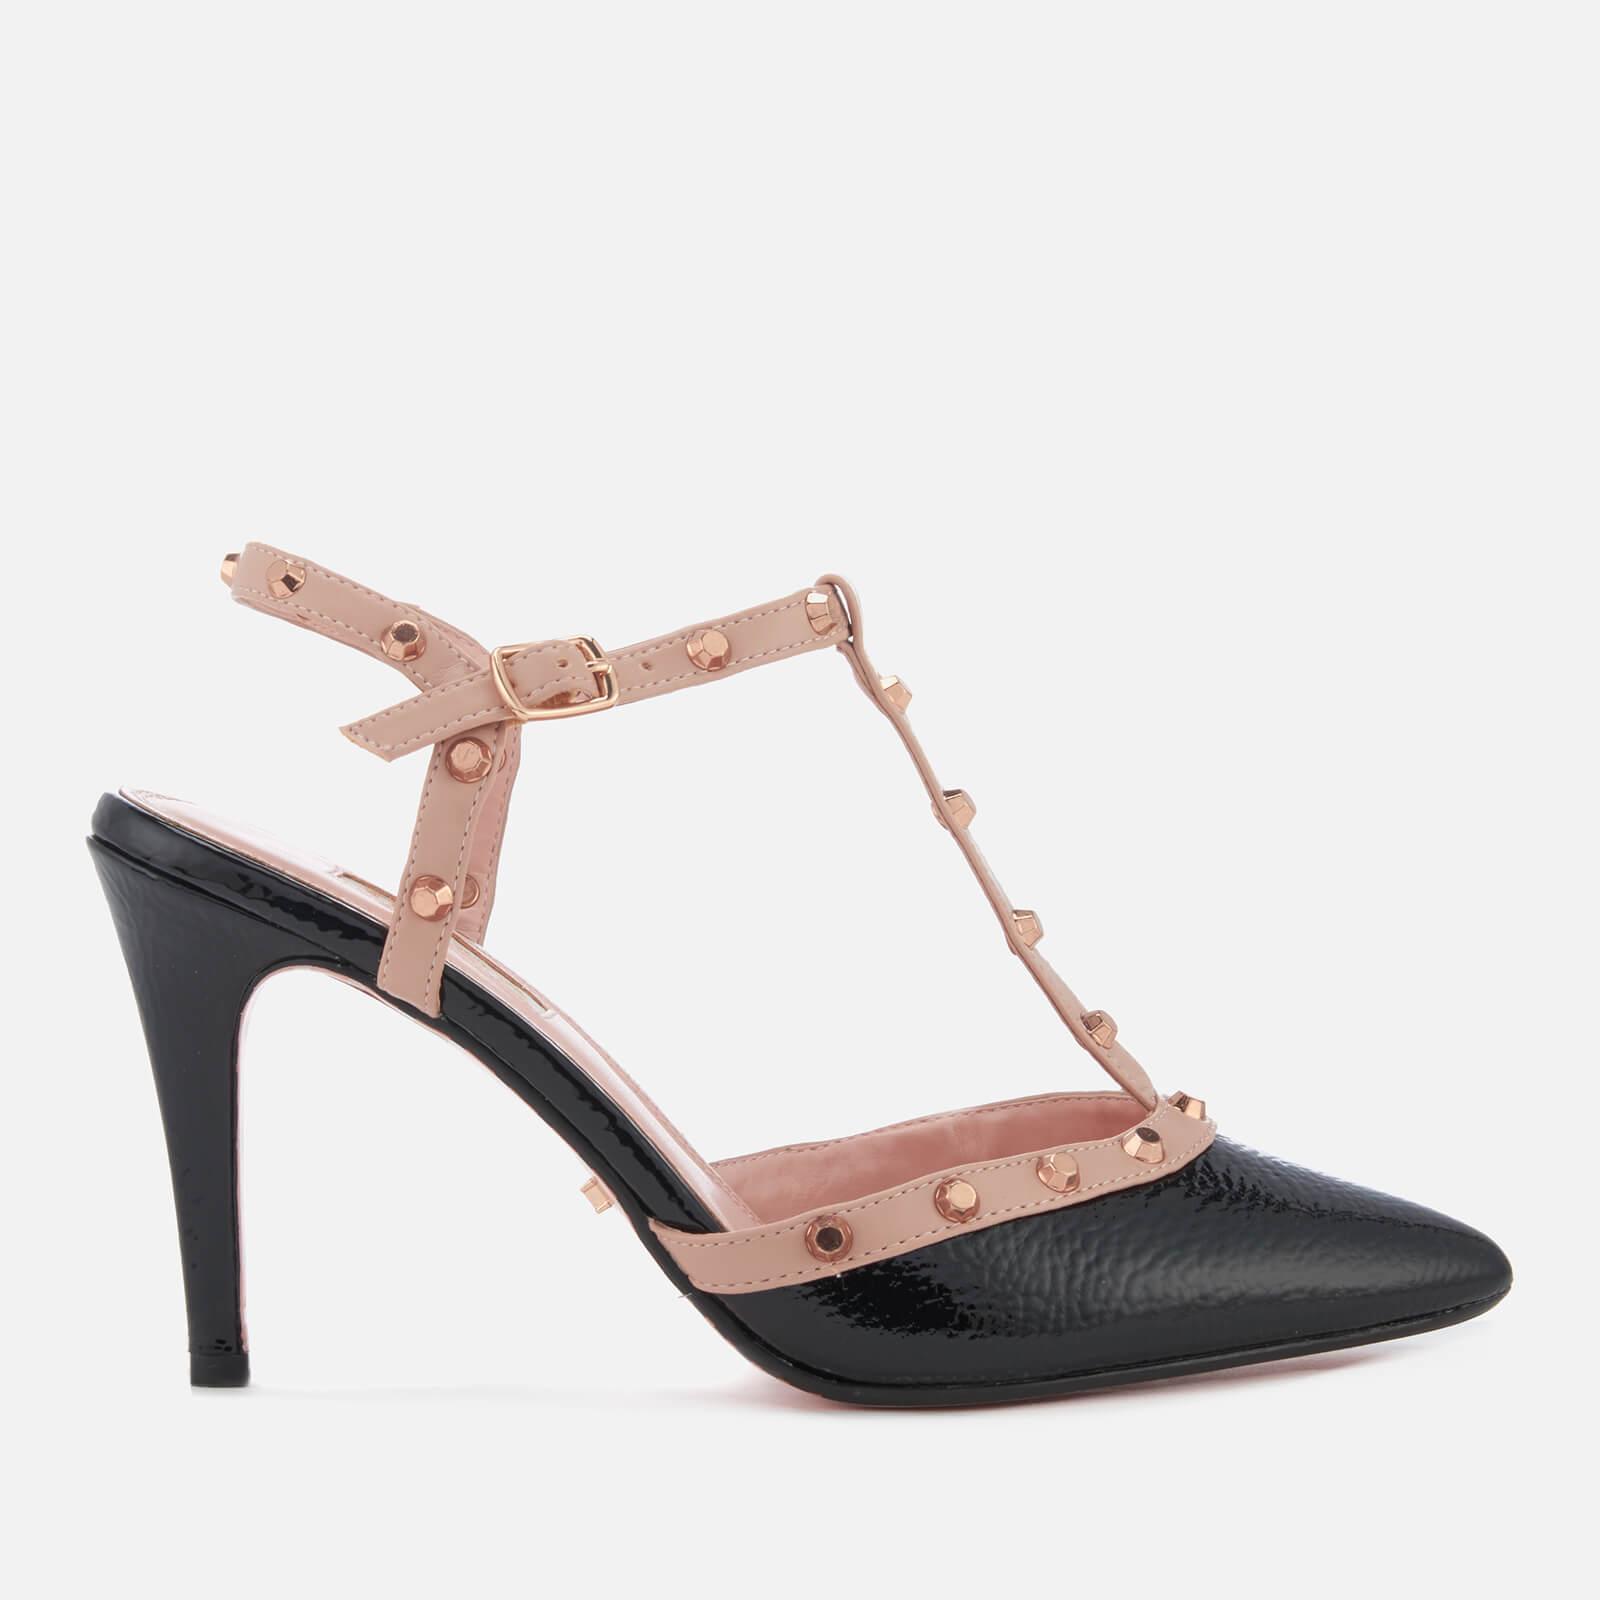 Dune Catelyn Leather Court Shoes in Black - Lyst